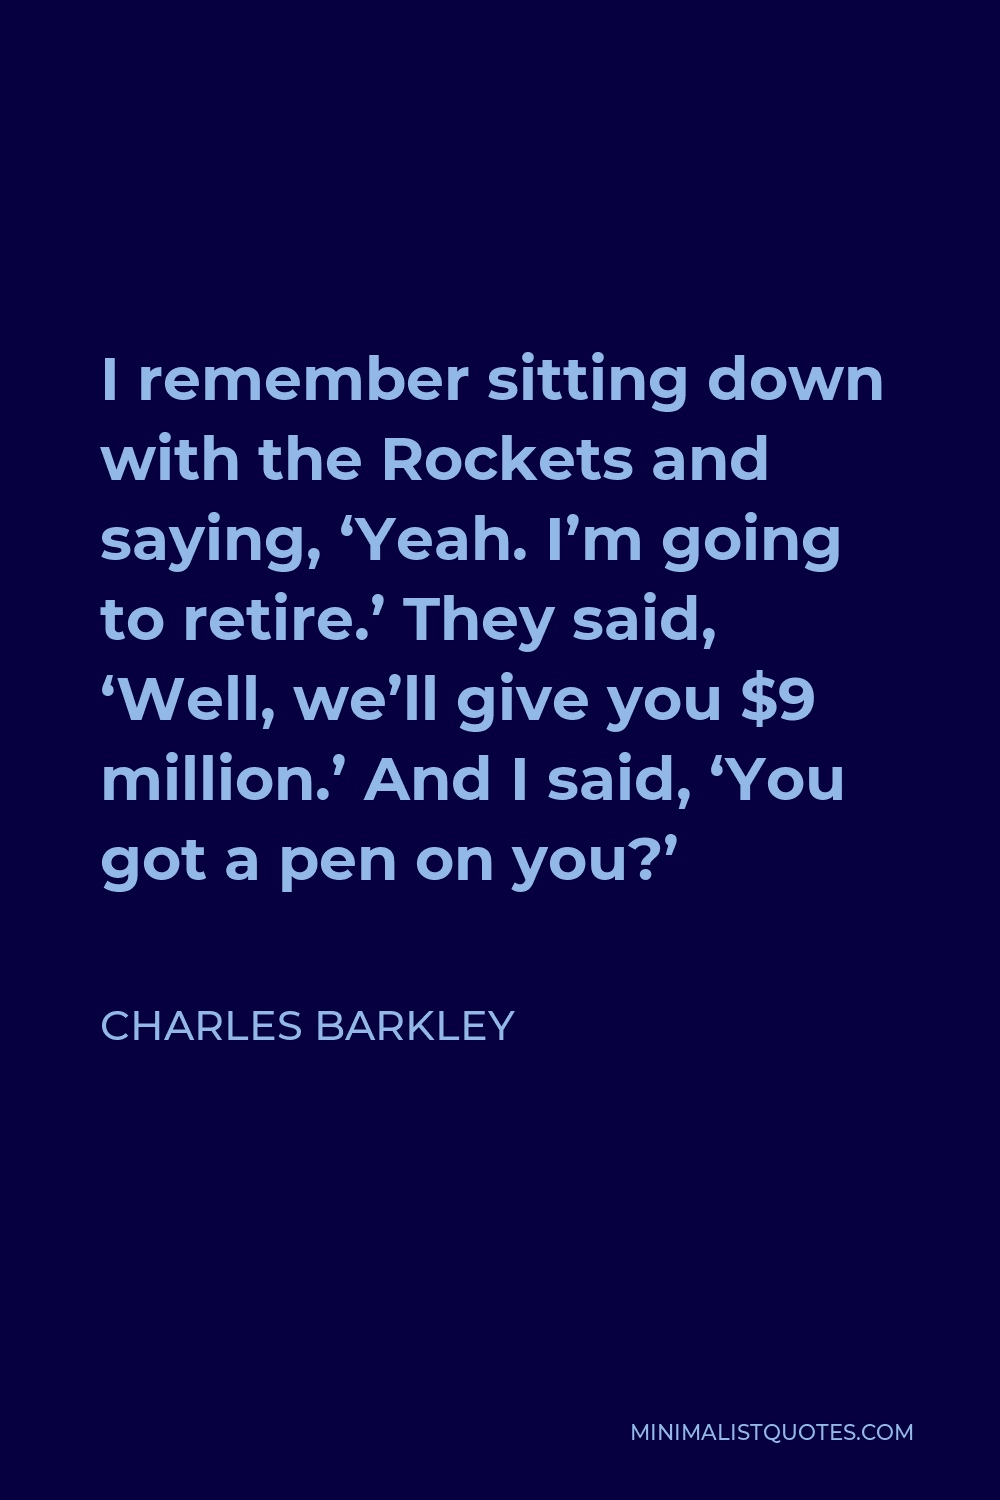 Charles Barkley Quote - I remember sitting down with the Rockets and saying, ‘Yeah. I’m going to retire.’ They said, ‘Well, we’ll give you $9 million.’ And I said, ‘You got a pen on you?’